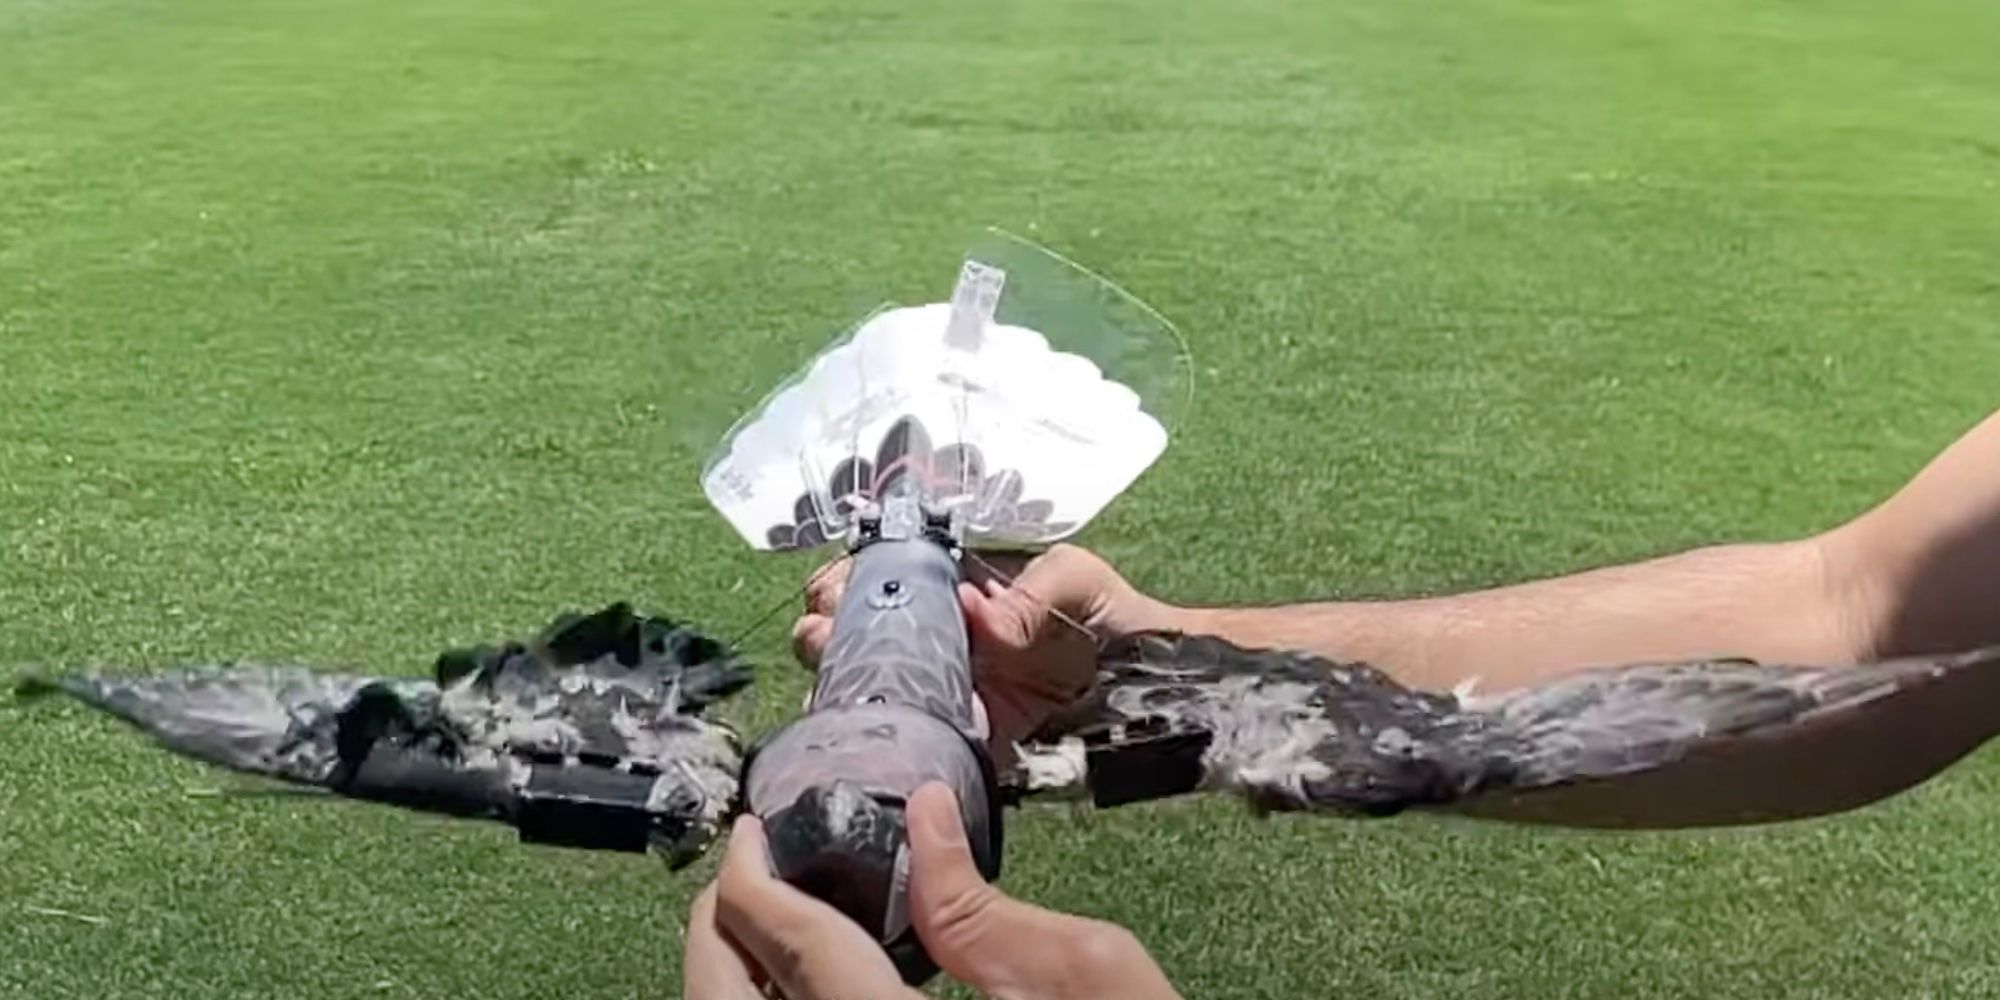 A bird drone held in a person's hand shows some of the internal components, including wing-flapping mechanisms